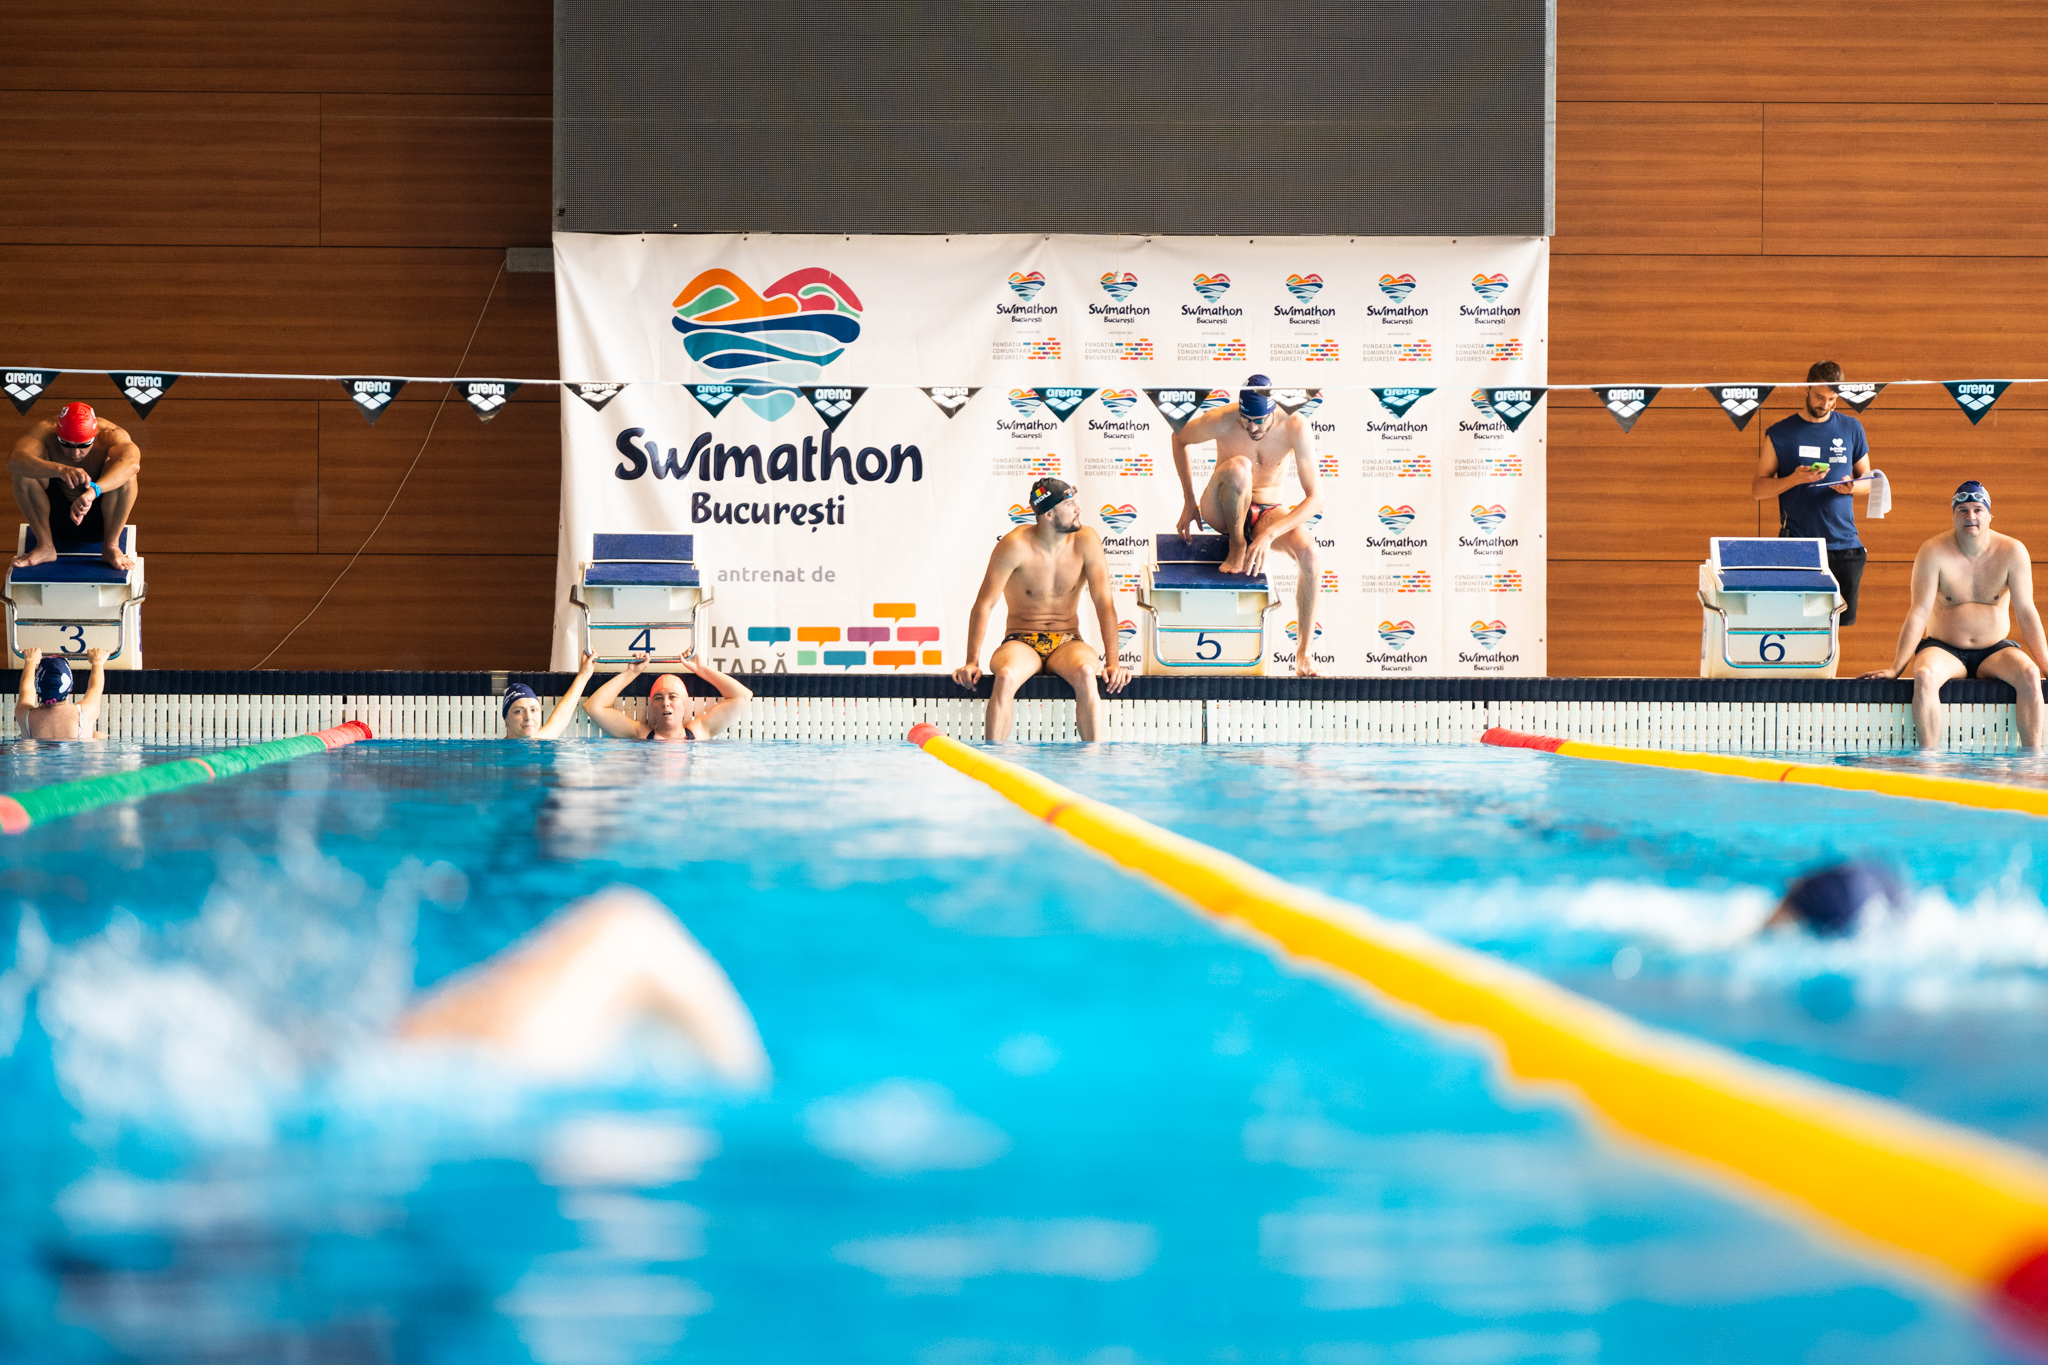 Fundraising event Swimathon Bucharest opens registrations for 1,000 swimmer-fundraisers